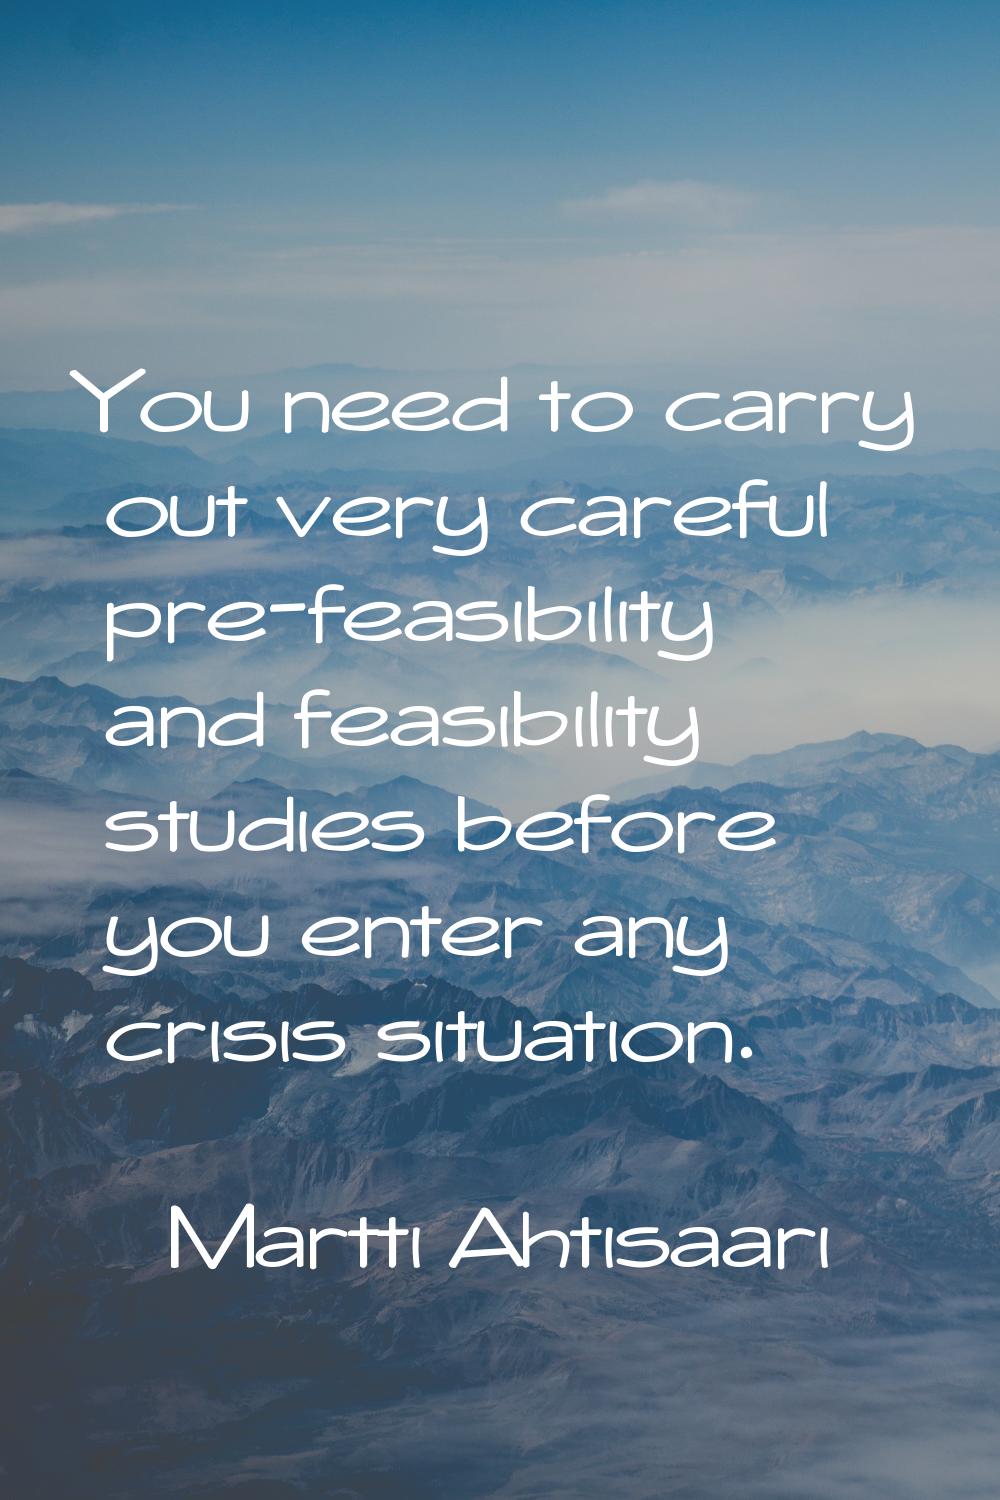 You need to carry out very careful pre-feasibility and feasibility studies before you enter any cri